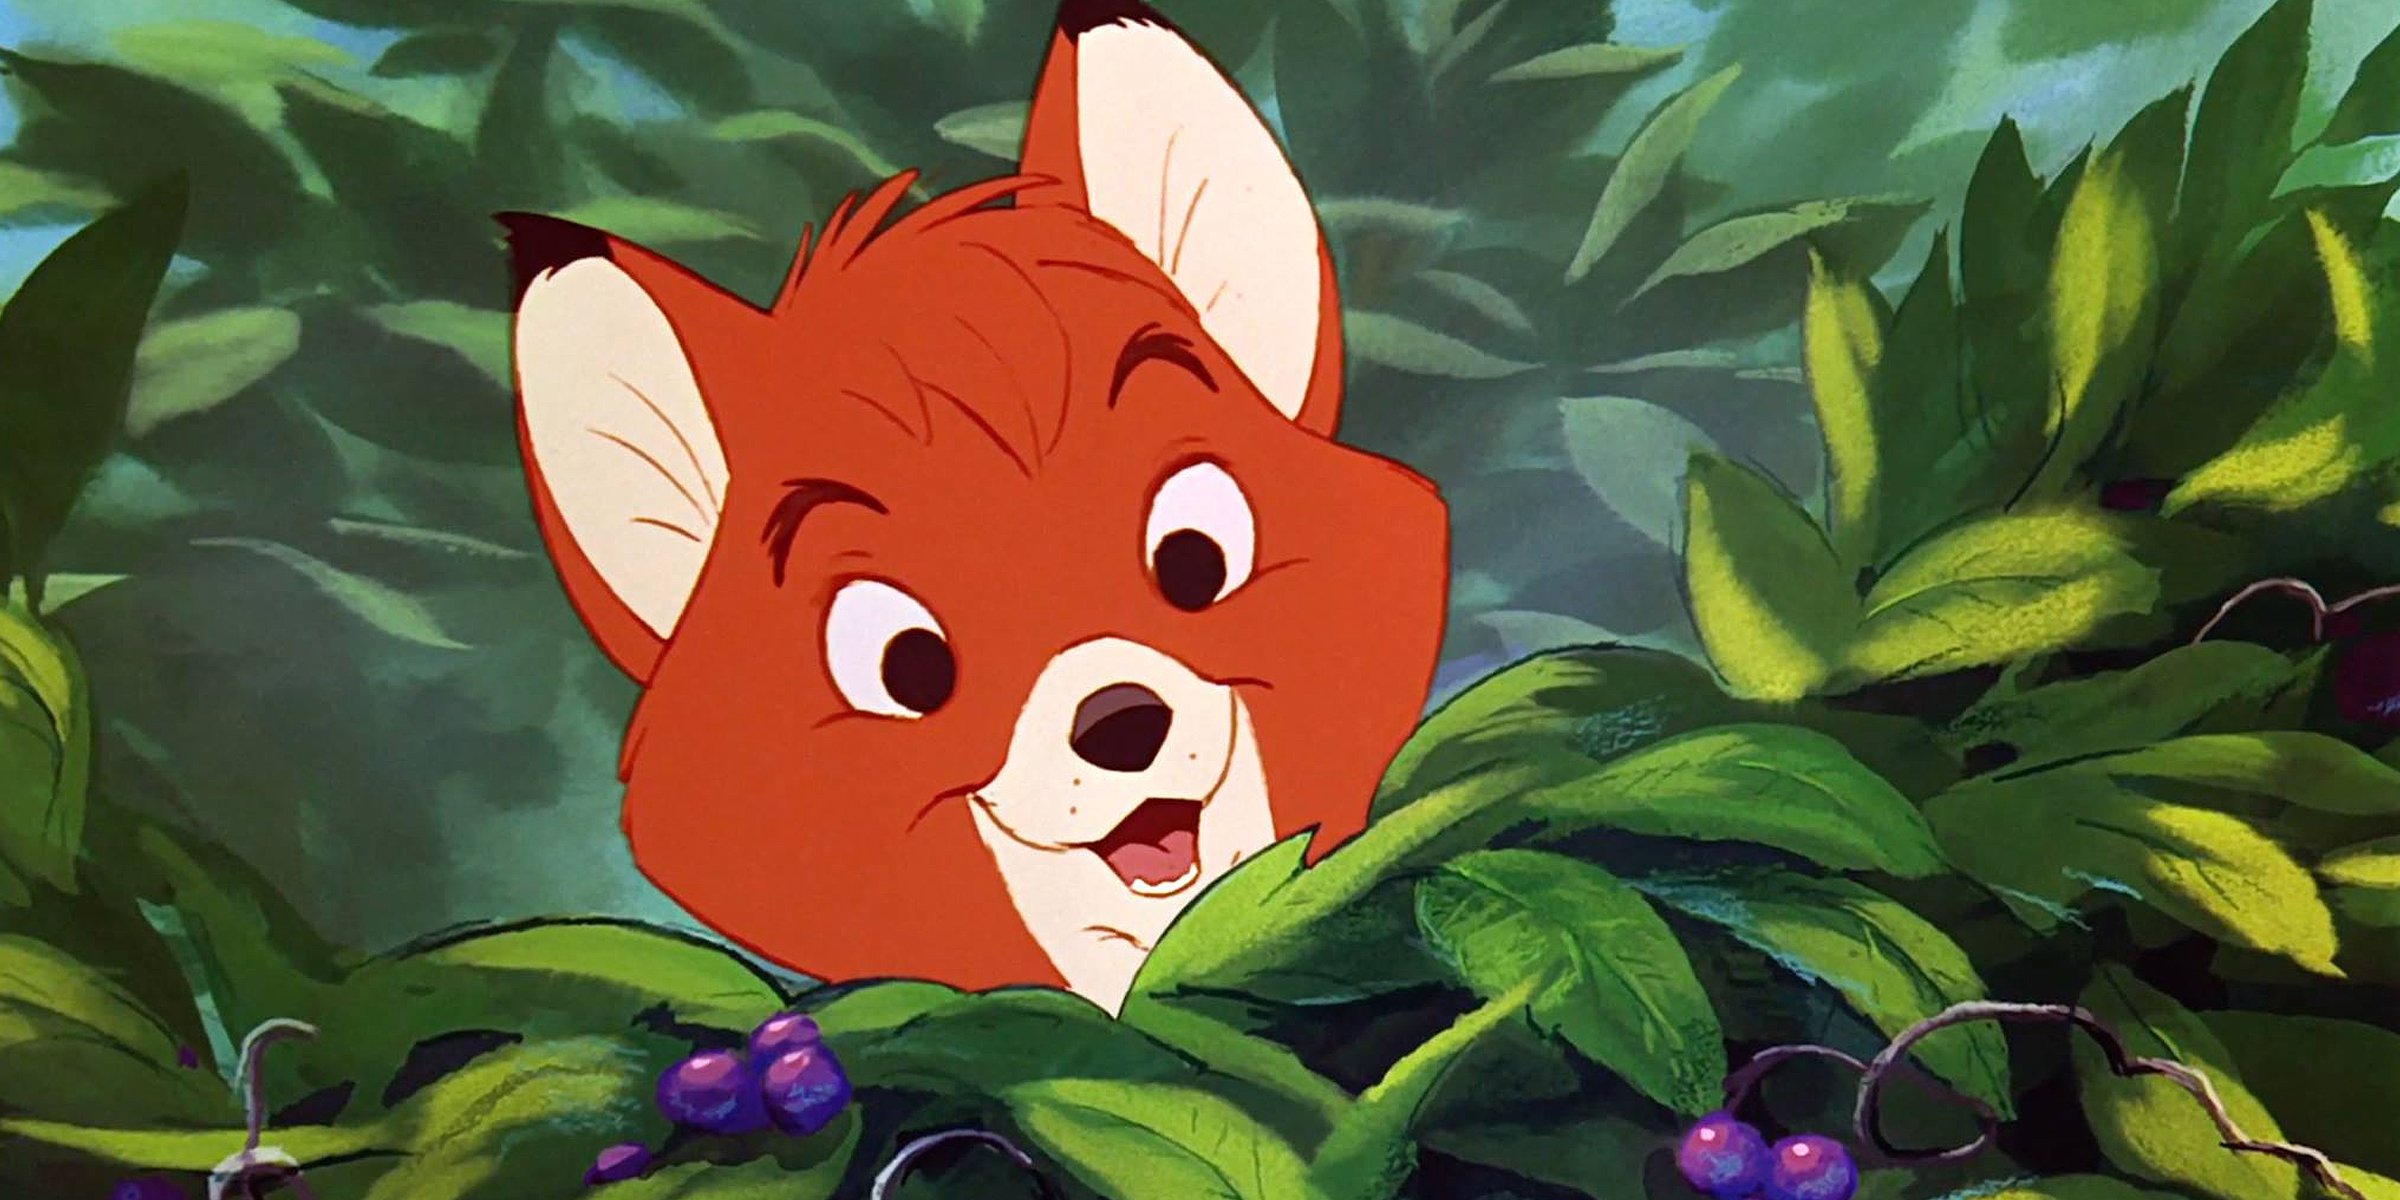 Tod from "The Fox And The Hound" | Source: facebook.com/DisneyFoxandHound